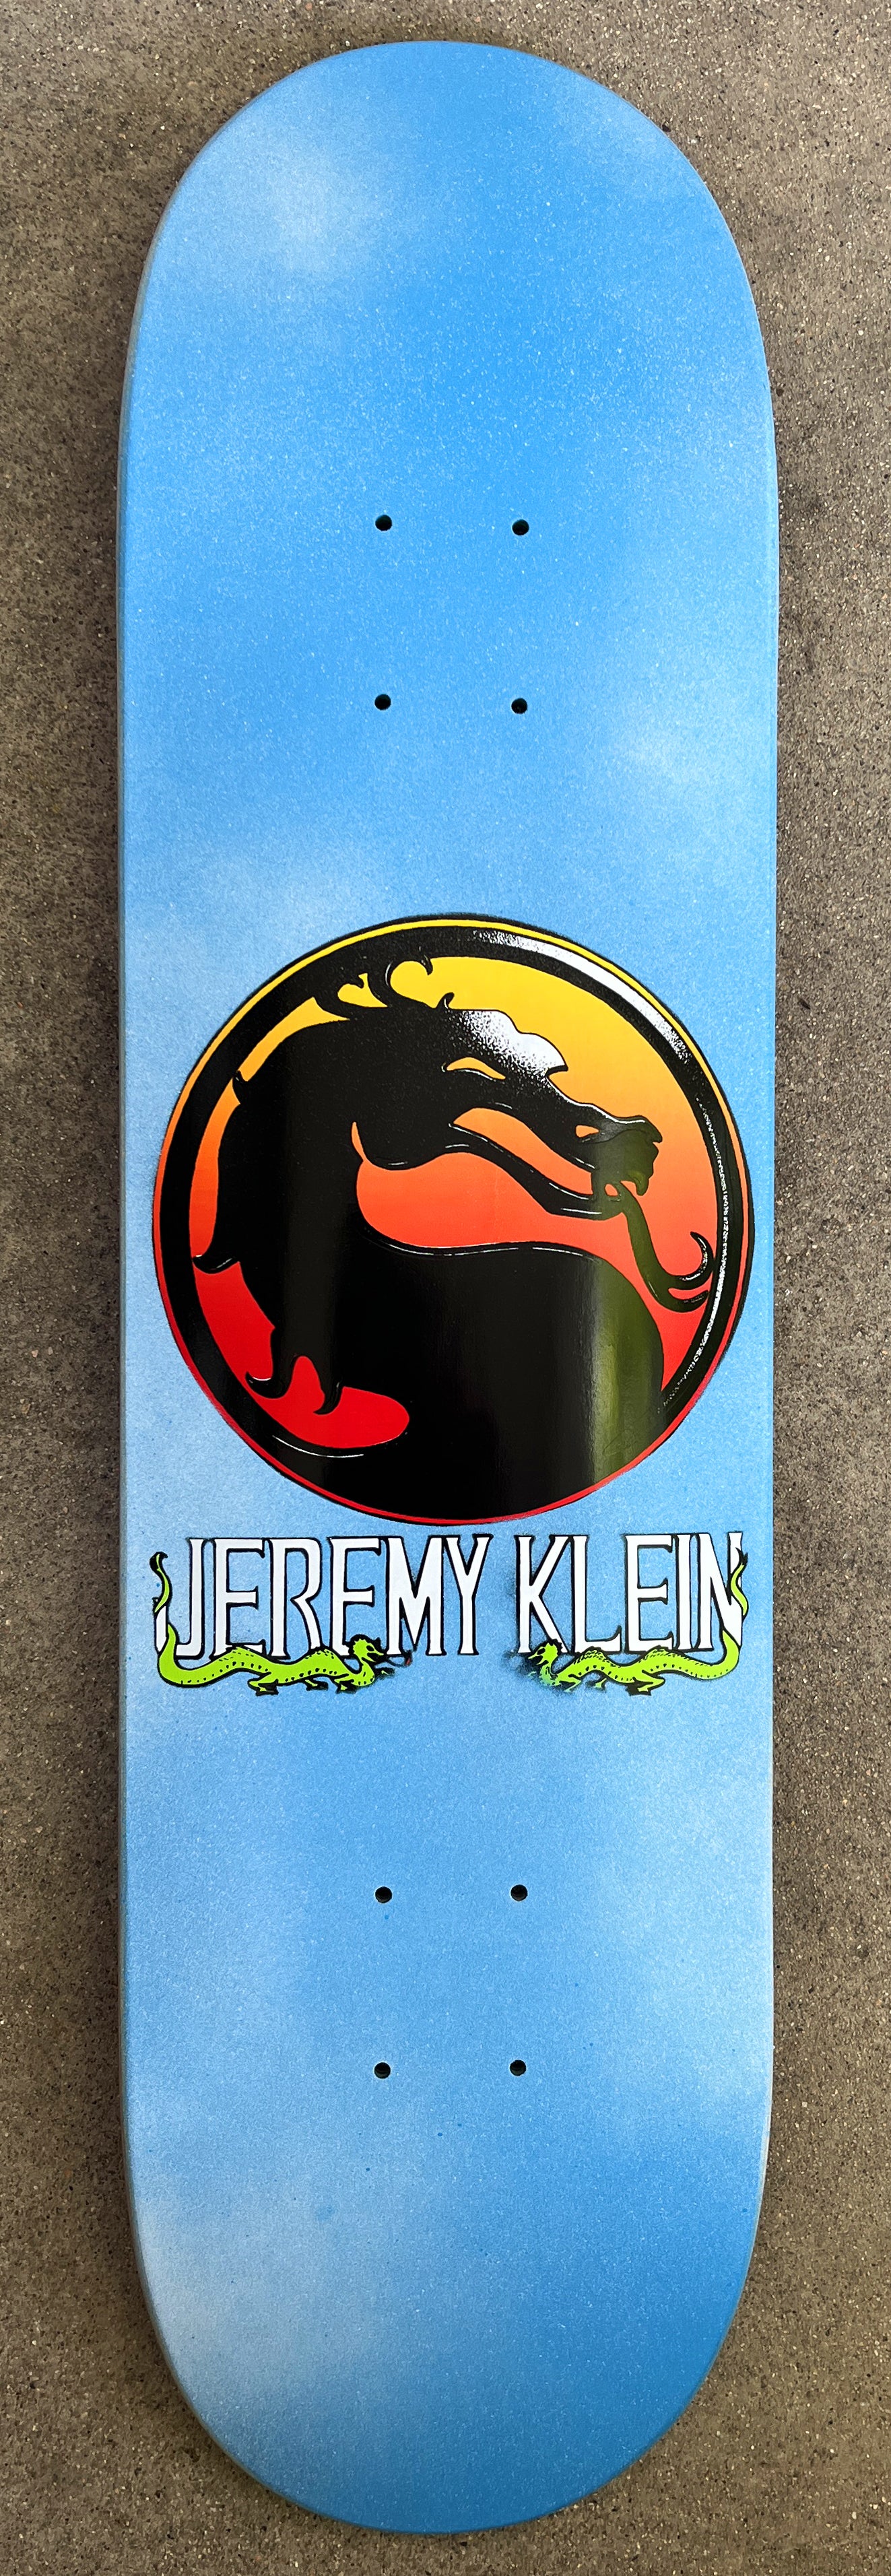 SIGNED jeremy klein dragon 8.0 X 31.75 HAND SCREENED CLOUDS